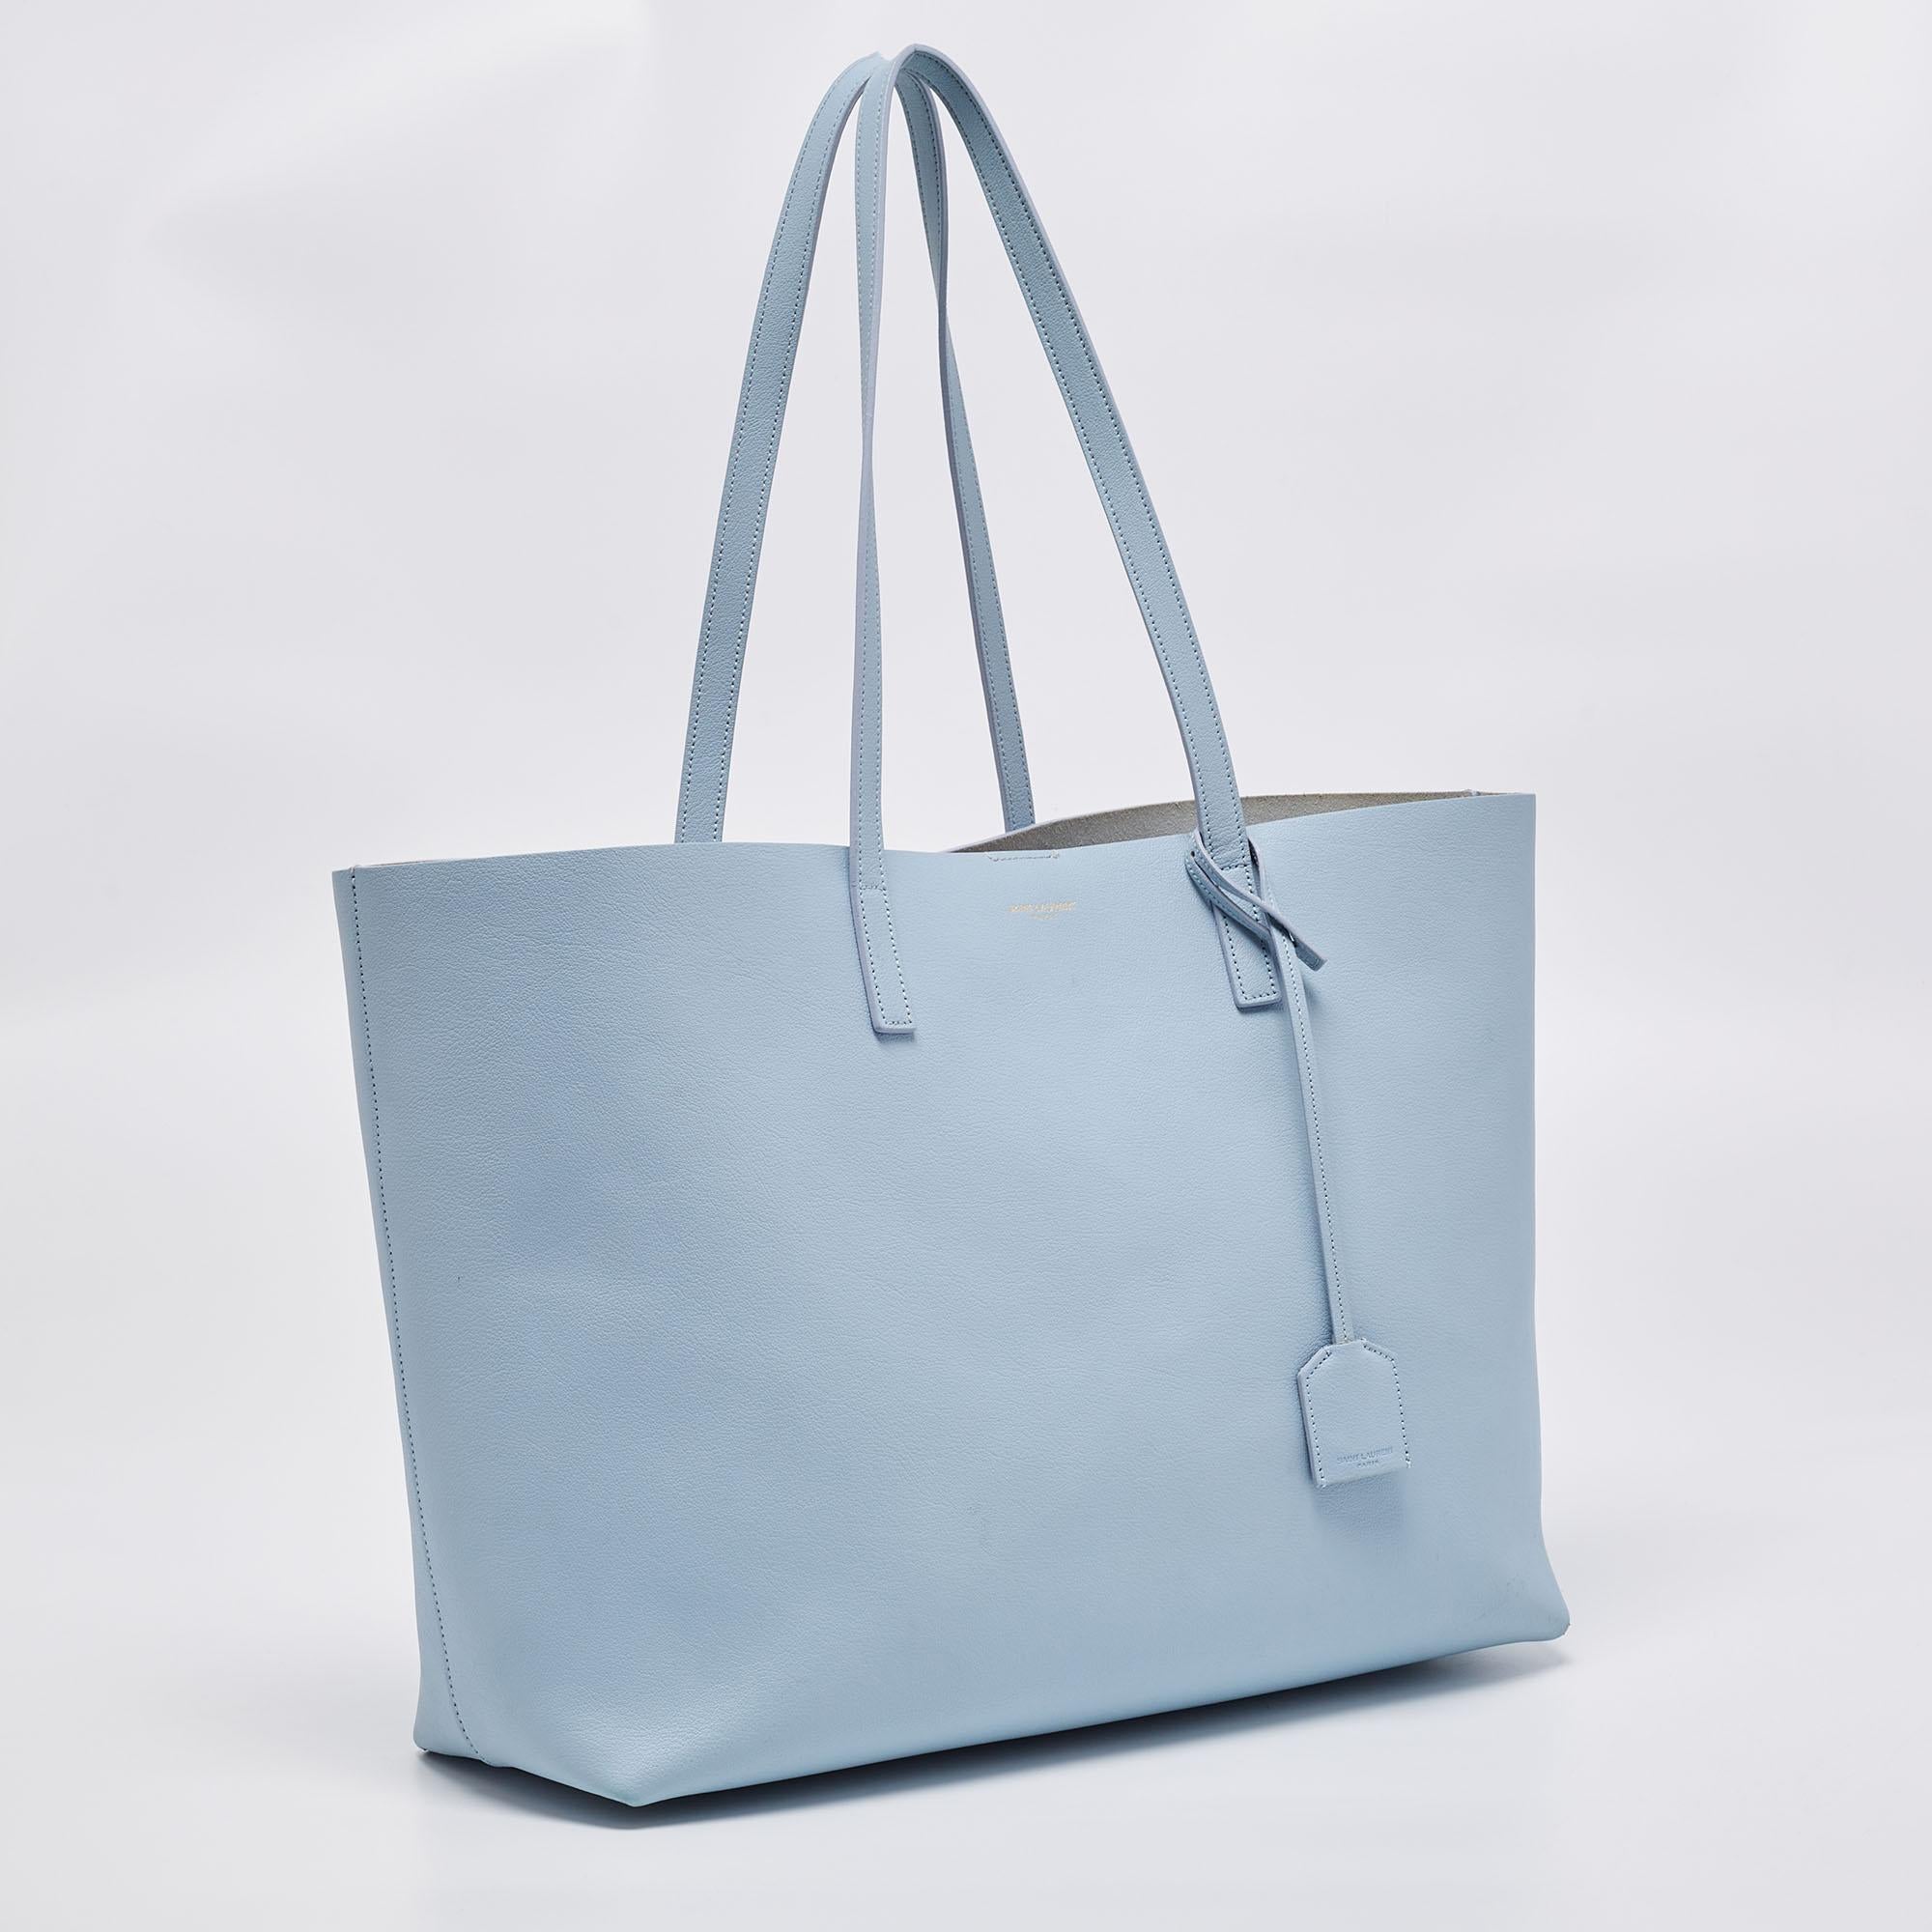 east west calfskin shopping tote bag